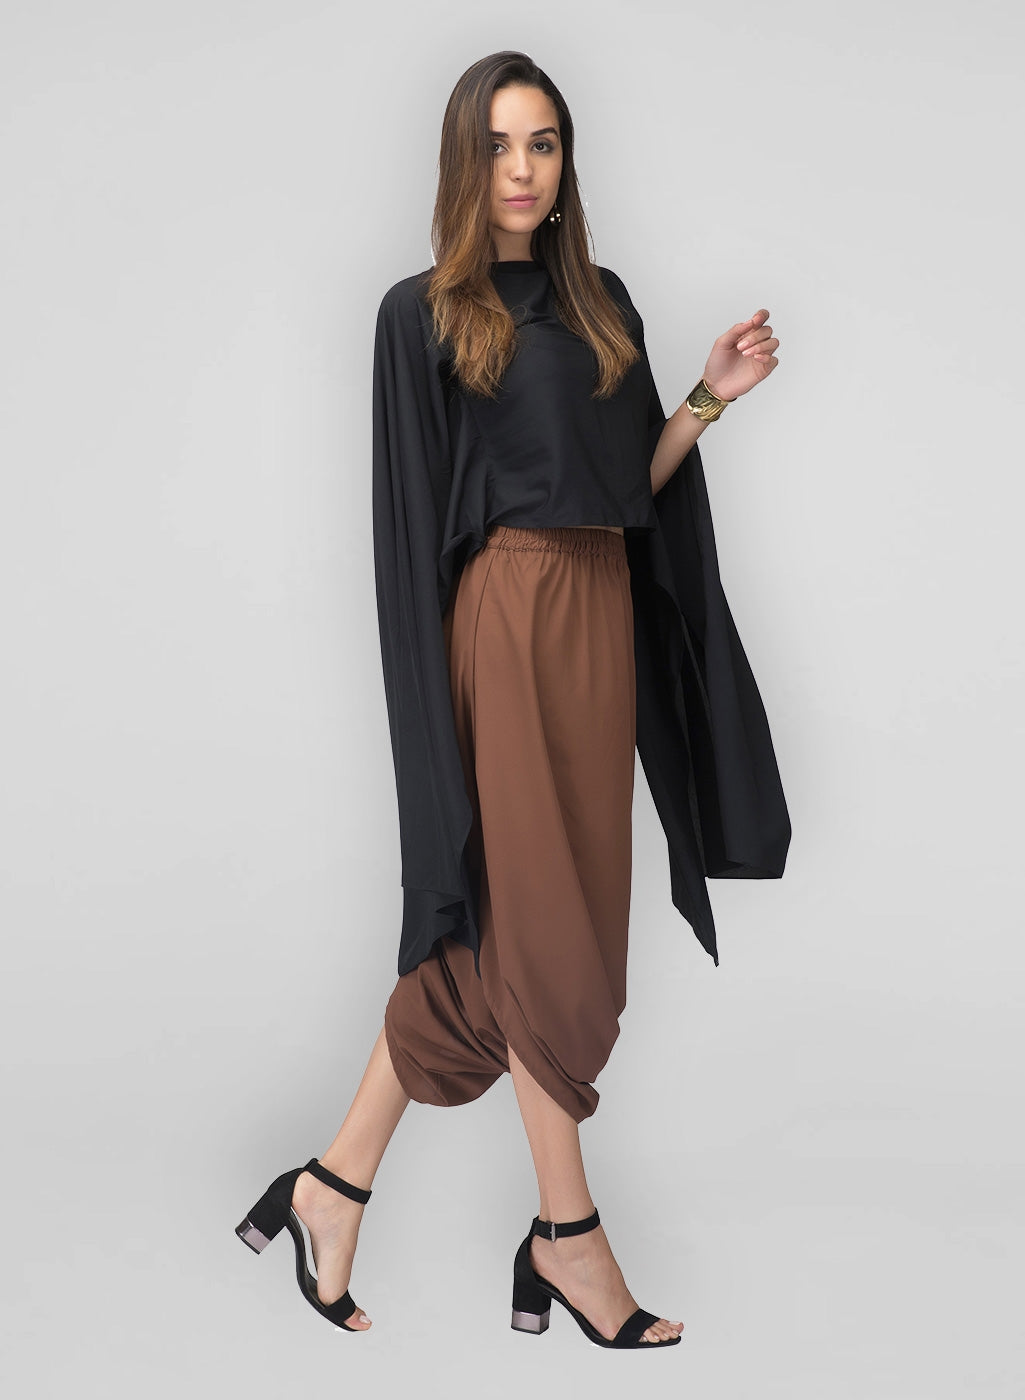 Step out in style wearing these lovely cowl pants with our flared top